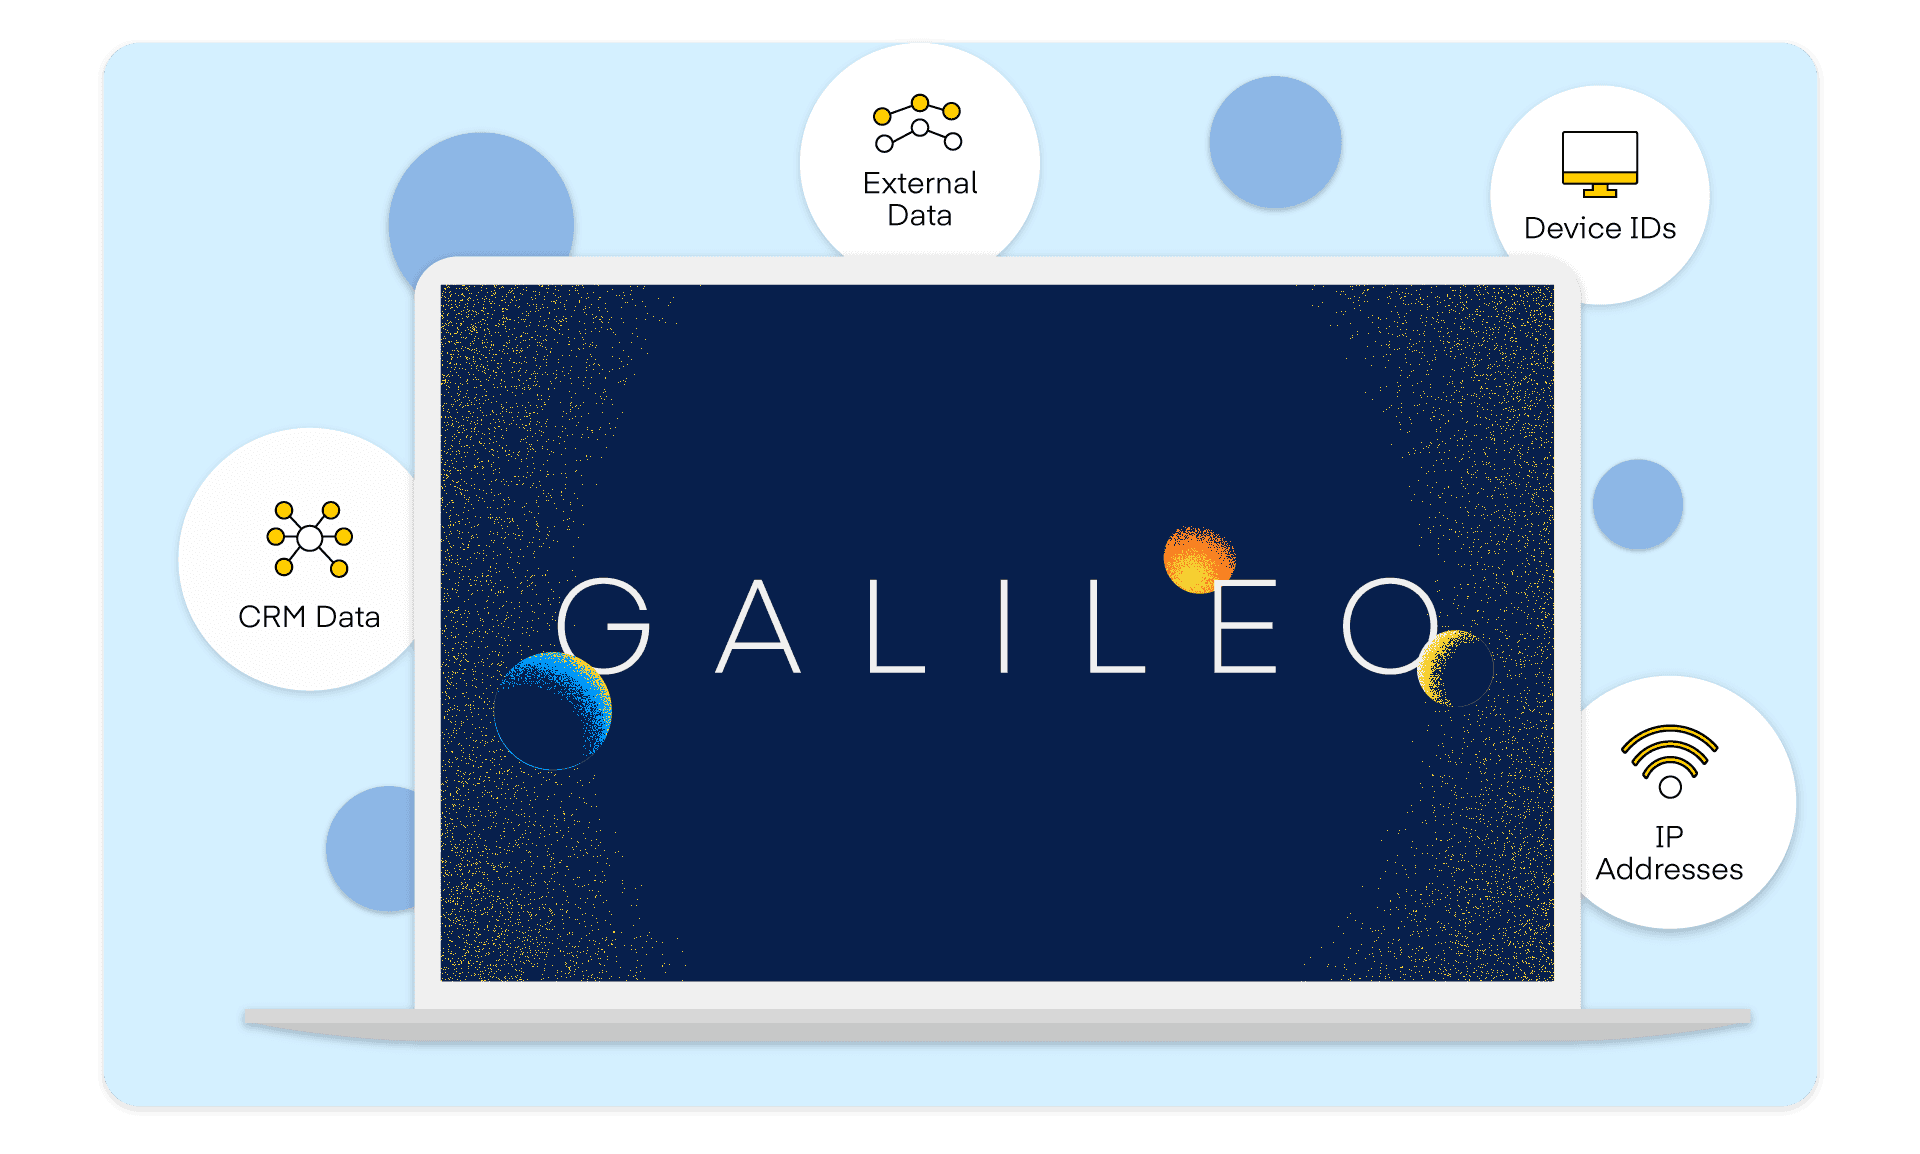 Graphic of a laptop with the text "GALILEO" in the center